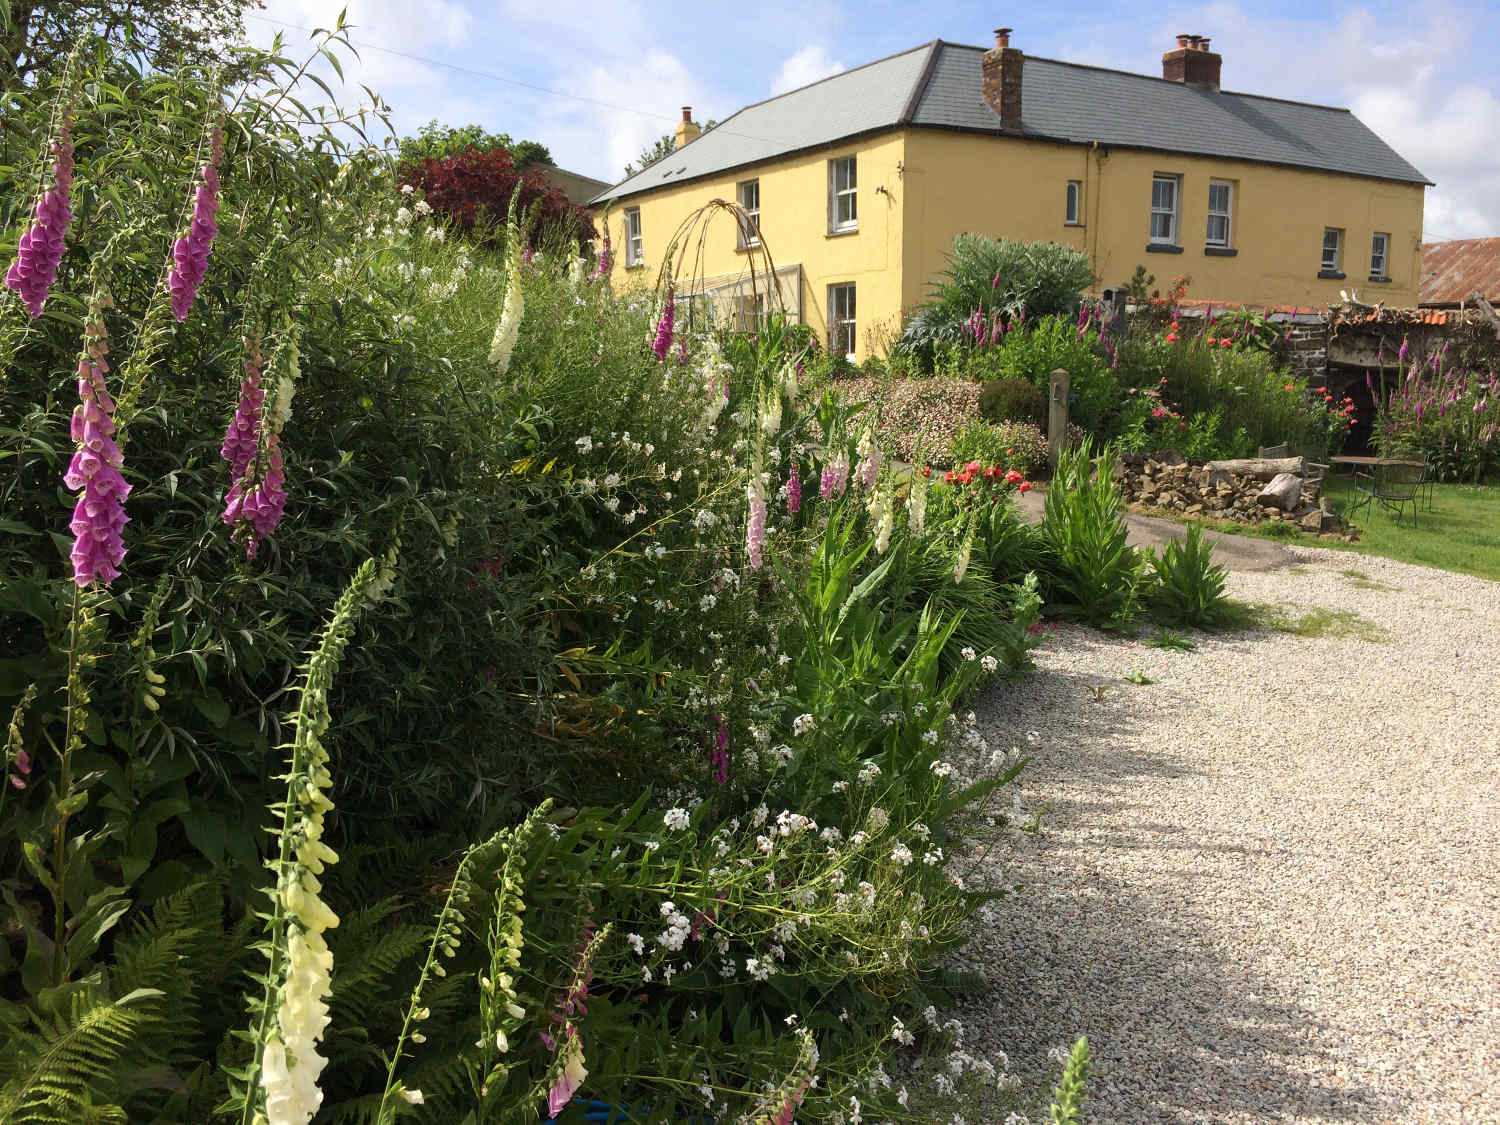 Image showing Frizenham Farmhouse in the background, and Fox Glove flowers and others in the foreground.